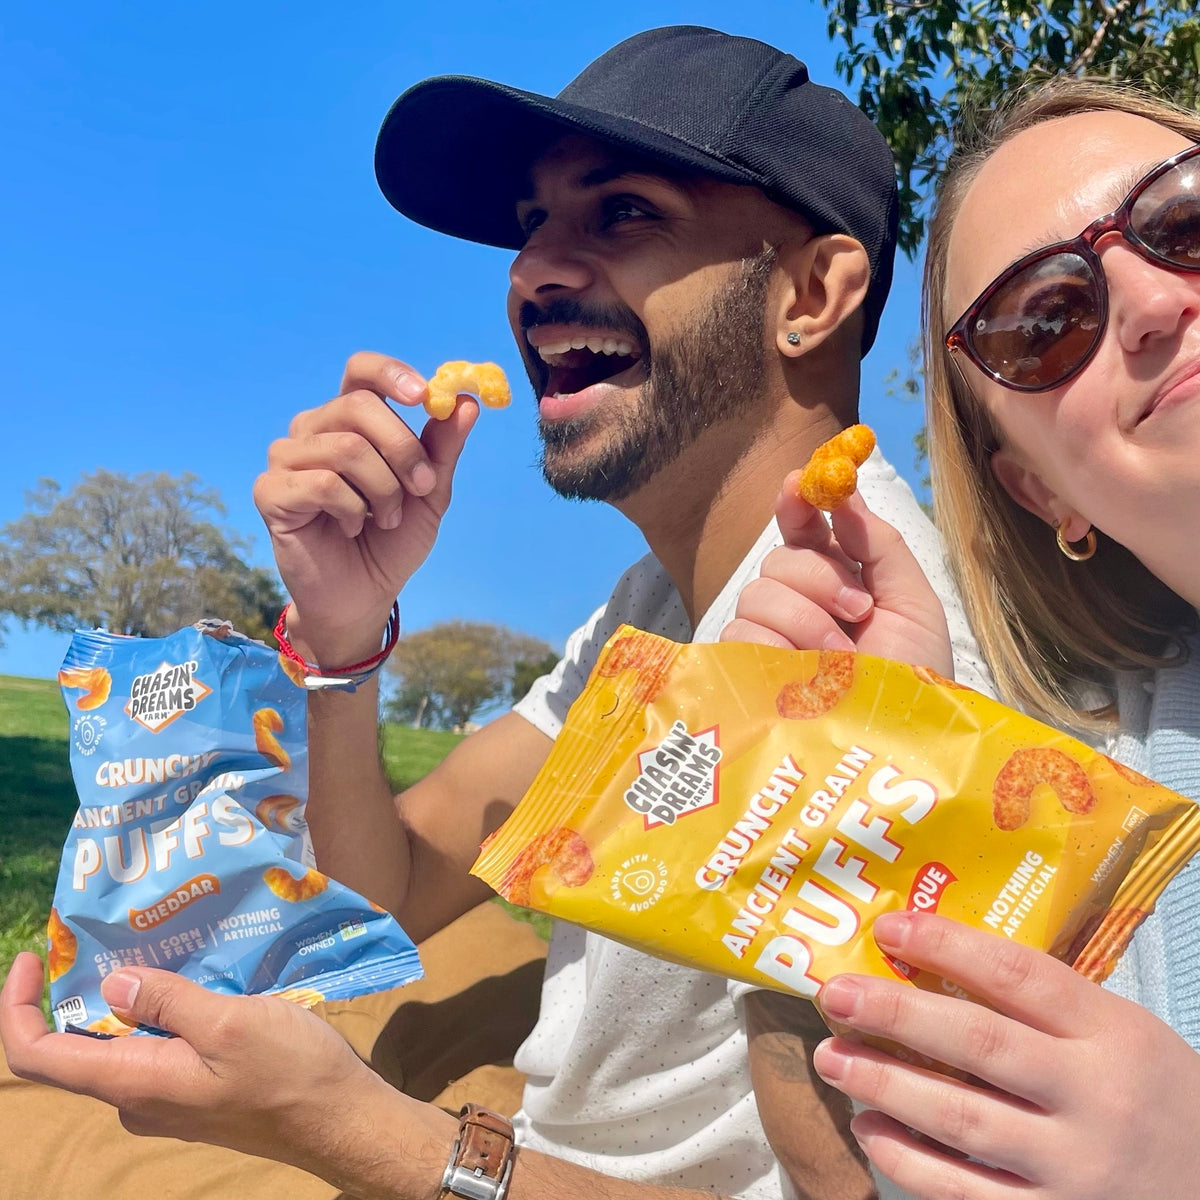 Man wearing baseball hat eating a bag of cheddar puffs, woman wearing sunglasses eating a bag of barbeque puffs.